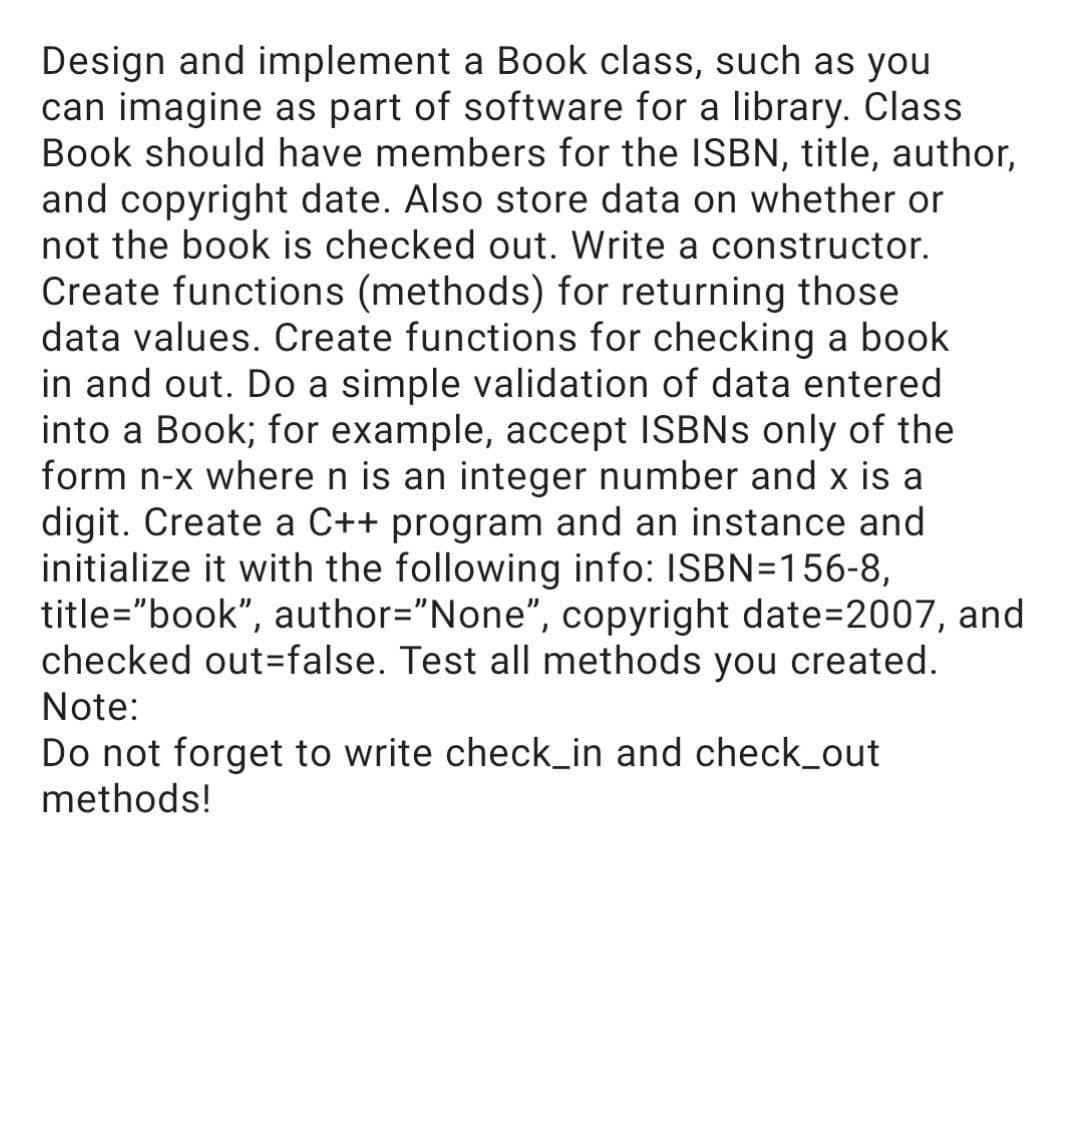 Design and implement a Book class, such as you
can imagine as part of software for a library. Class
Book should have members for the ISBN, title, author,
and copyright date. Also store data on whether or
not the book is checked out. Write a constructor.
Create functions (methods) for returning those
data values. Create functions for checking a book
in and out. Do a simple validation of data entered
into a Book; for example, accept ISBNS only of the
form n-x where n is an integer number and x is a
digit. Create a C++ program and an instance and
initialize it with the following info: ISBN=156-8,
title="book", author="None", copyright date=2007, and
checked out=false. Test all methods you created.
Note:
Do not forget to write check_in and check_out
methods!
